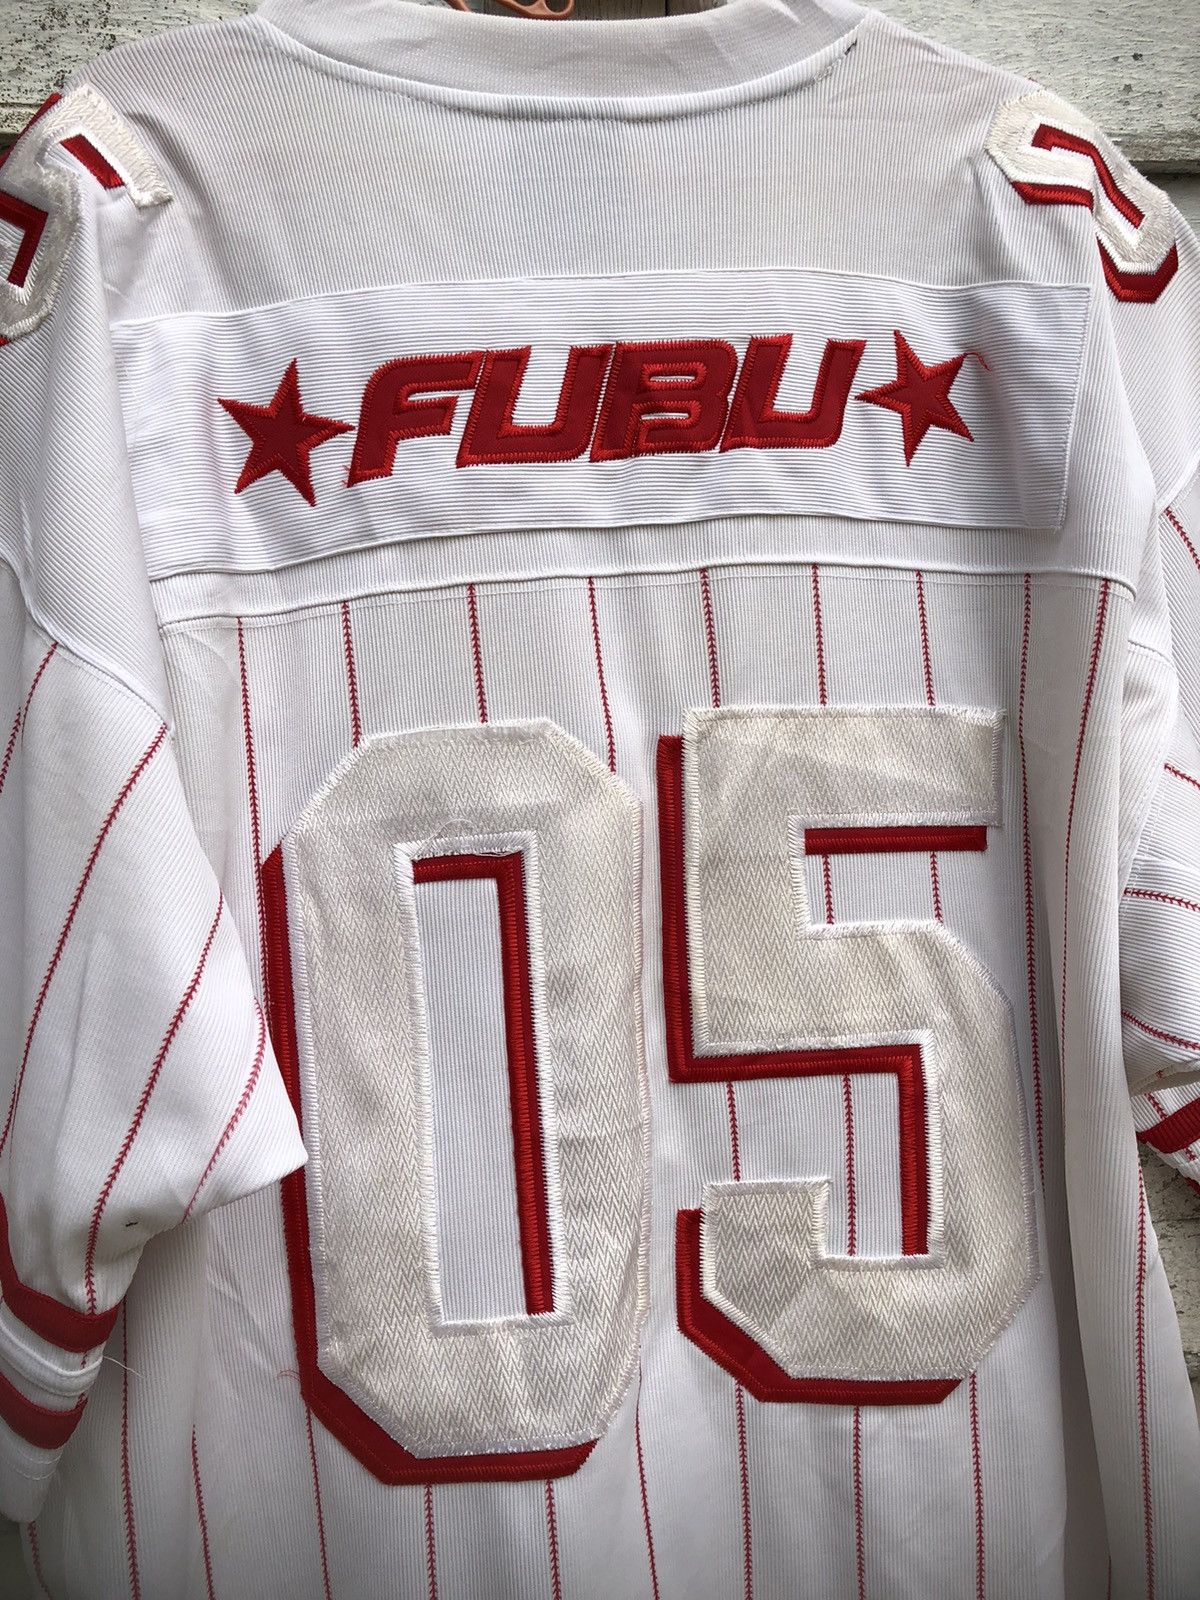 Vintage Limited Fubu 05 Rare Jersey Collection - 5